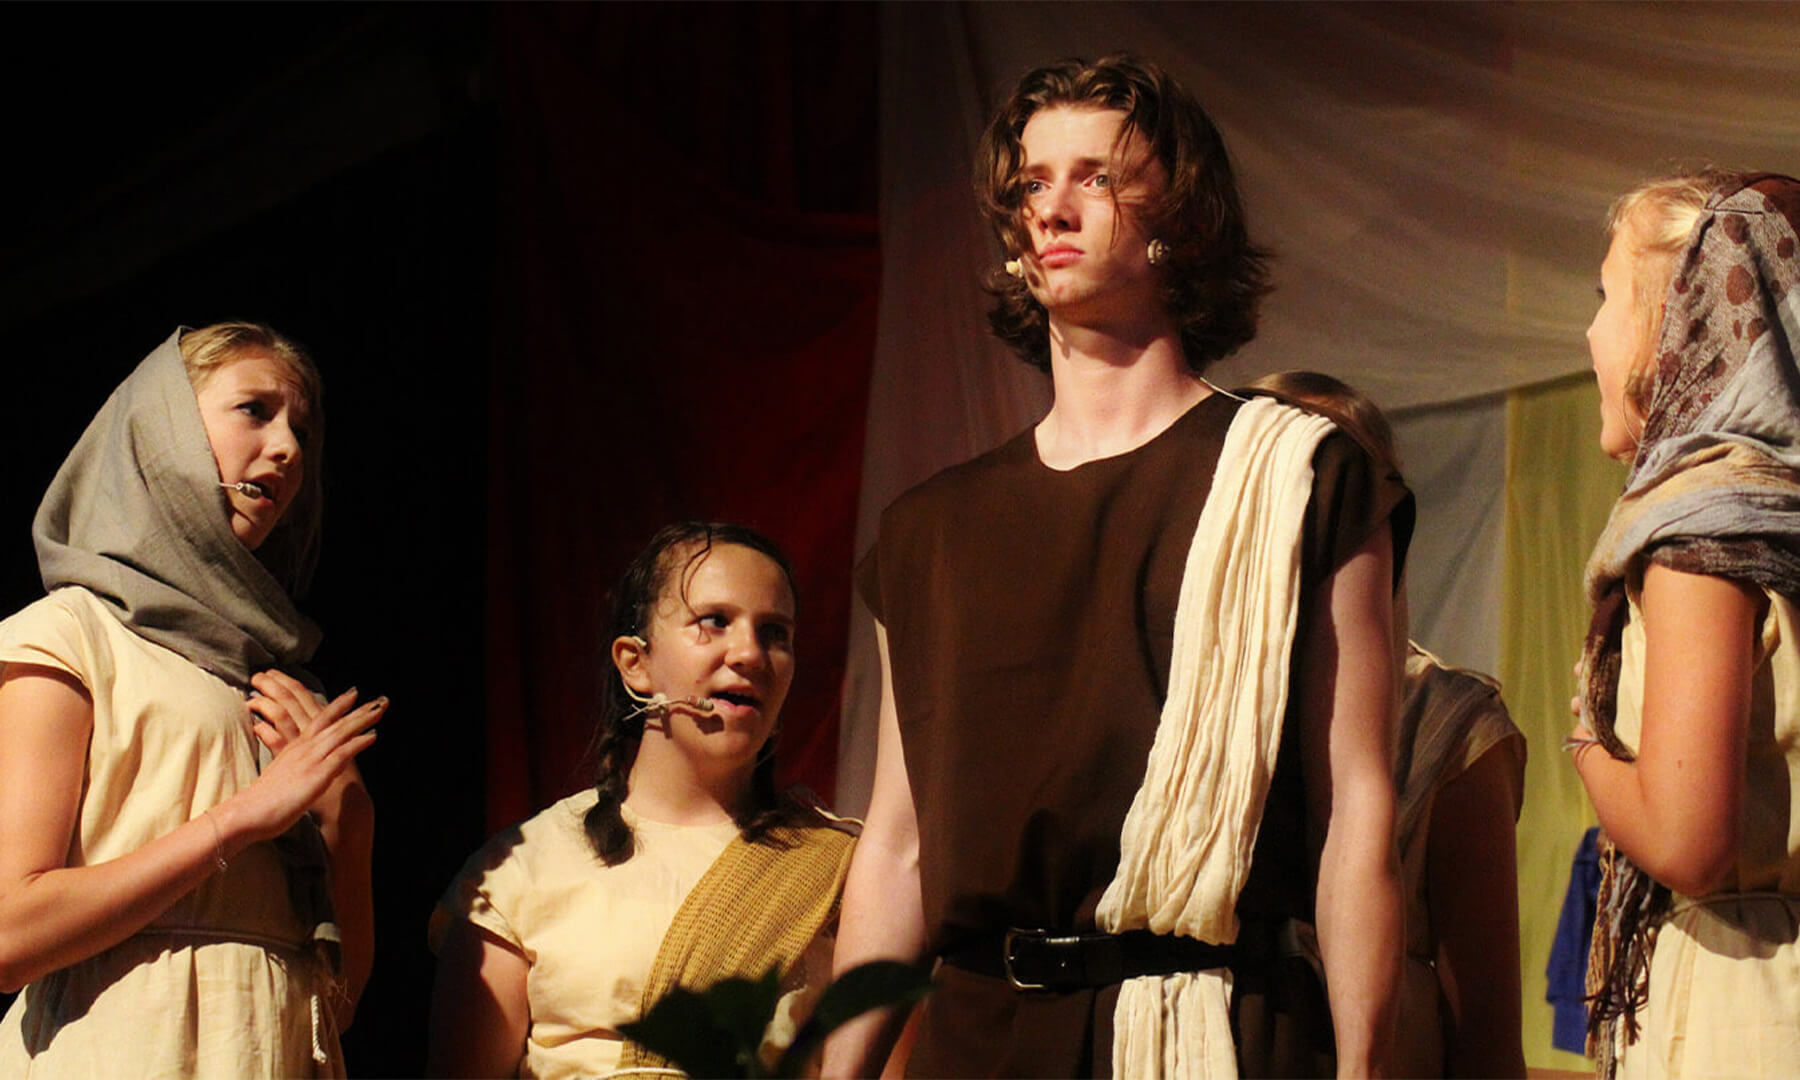 Actors on stage in a play.